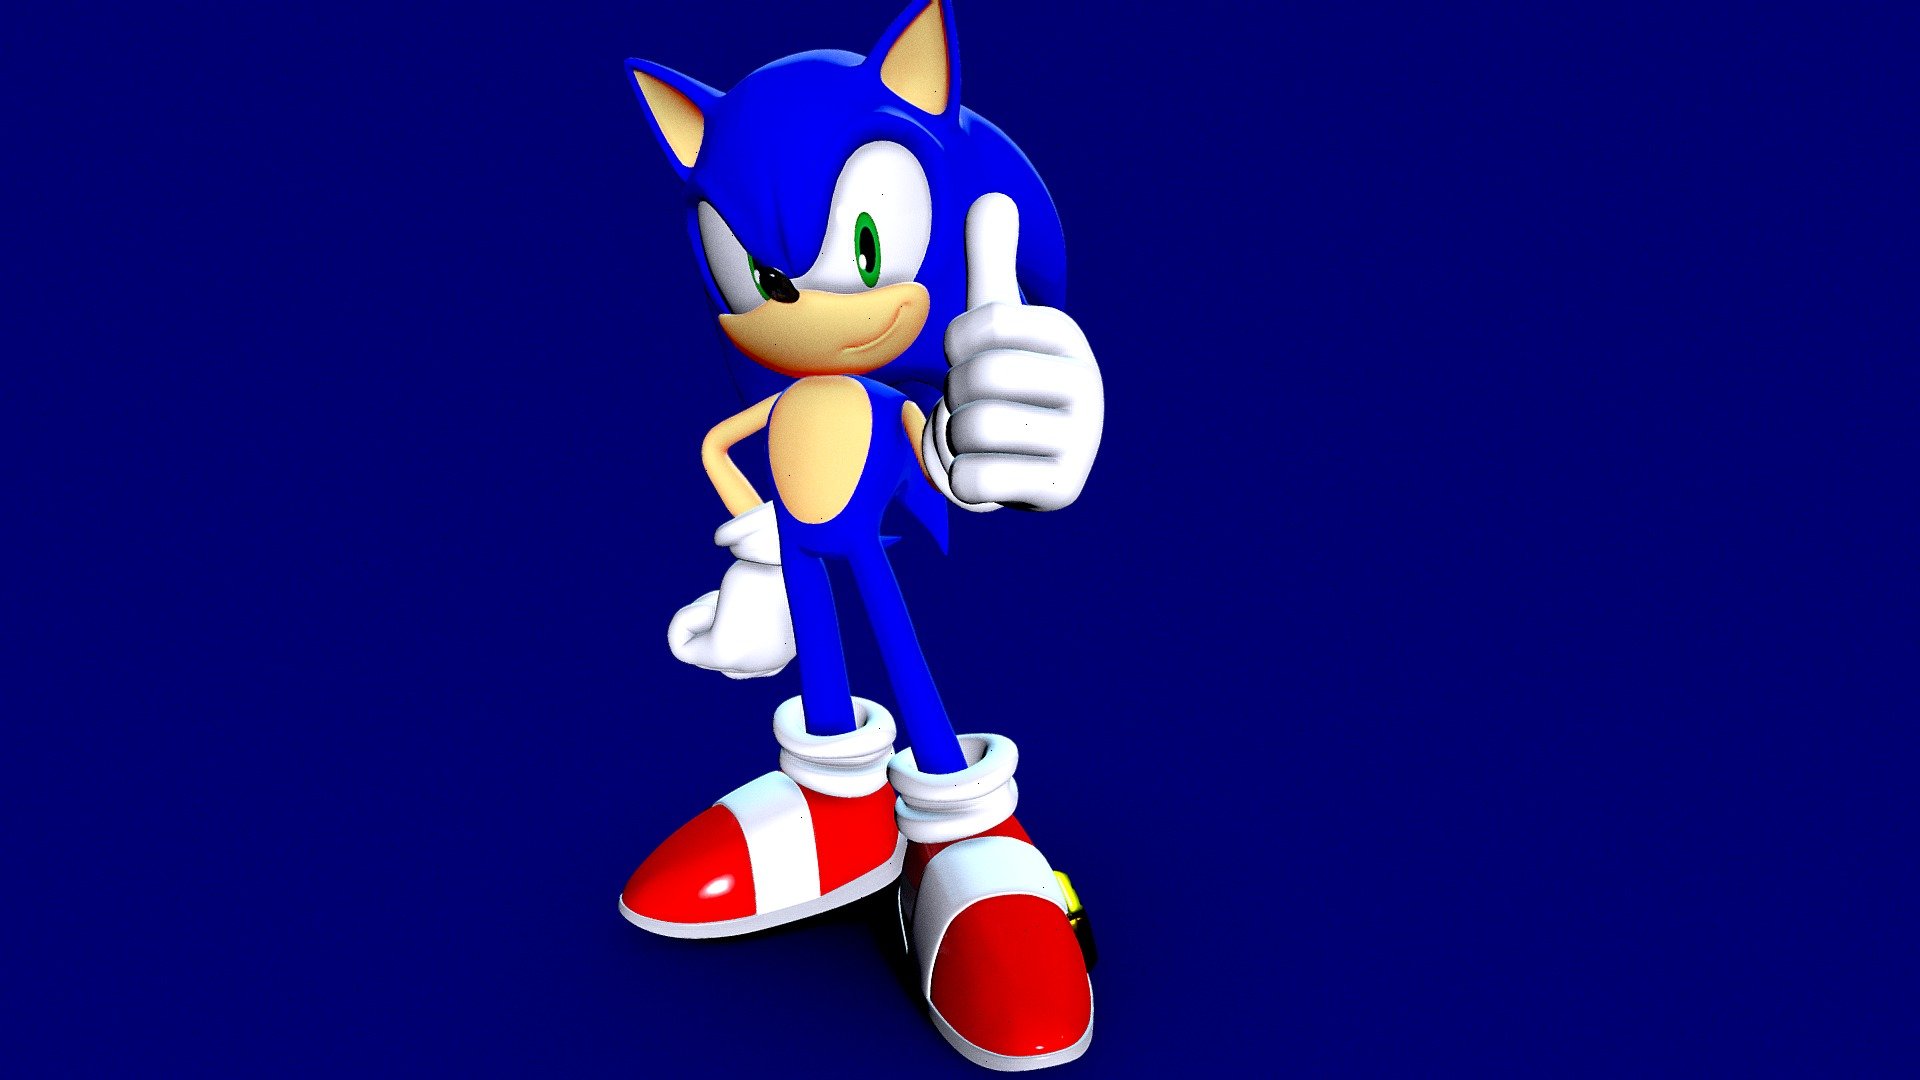 Not releasing this since it has no rig, this is simply just a test - Marza Sonic Thumbs UP - 3D model by ScruffyMcducky 3d model